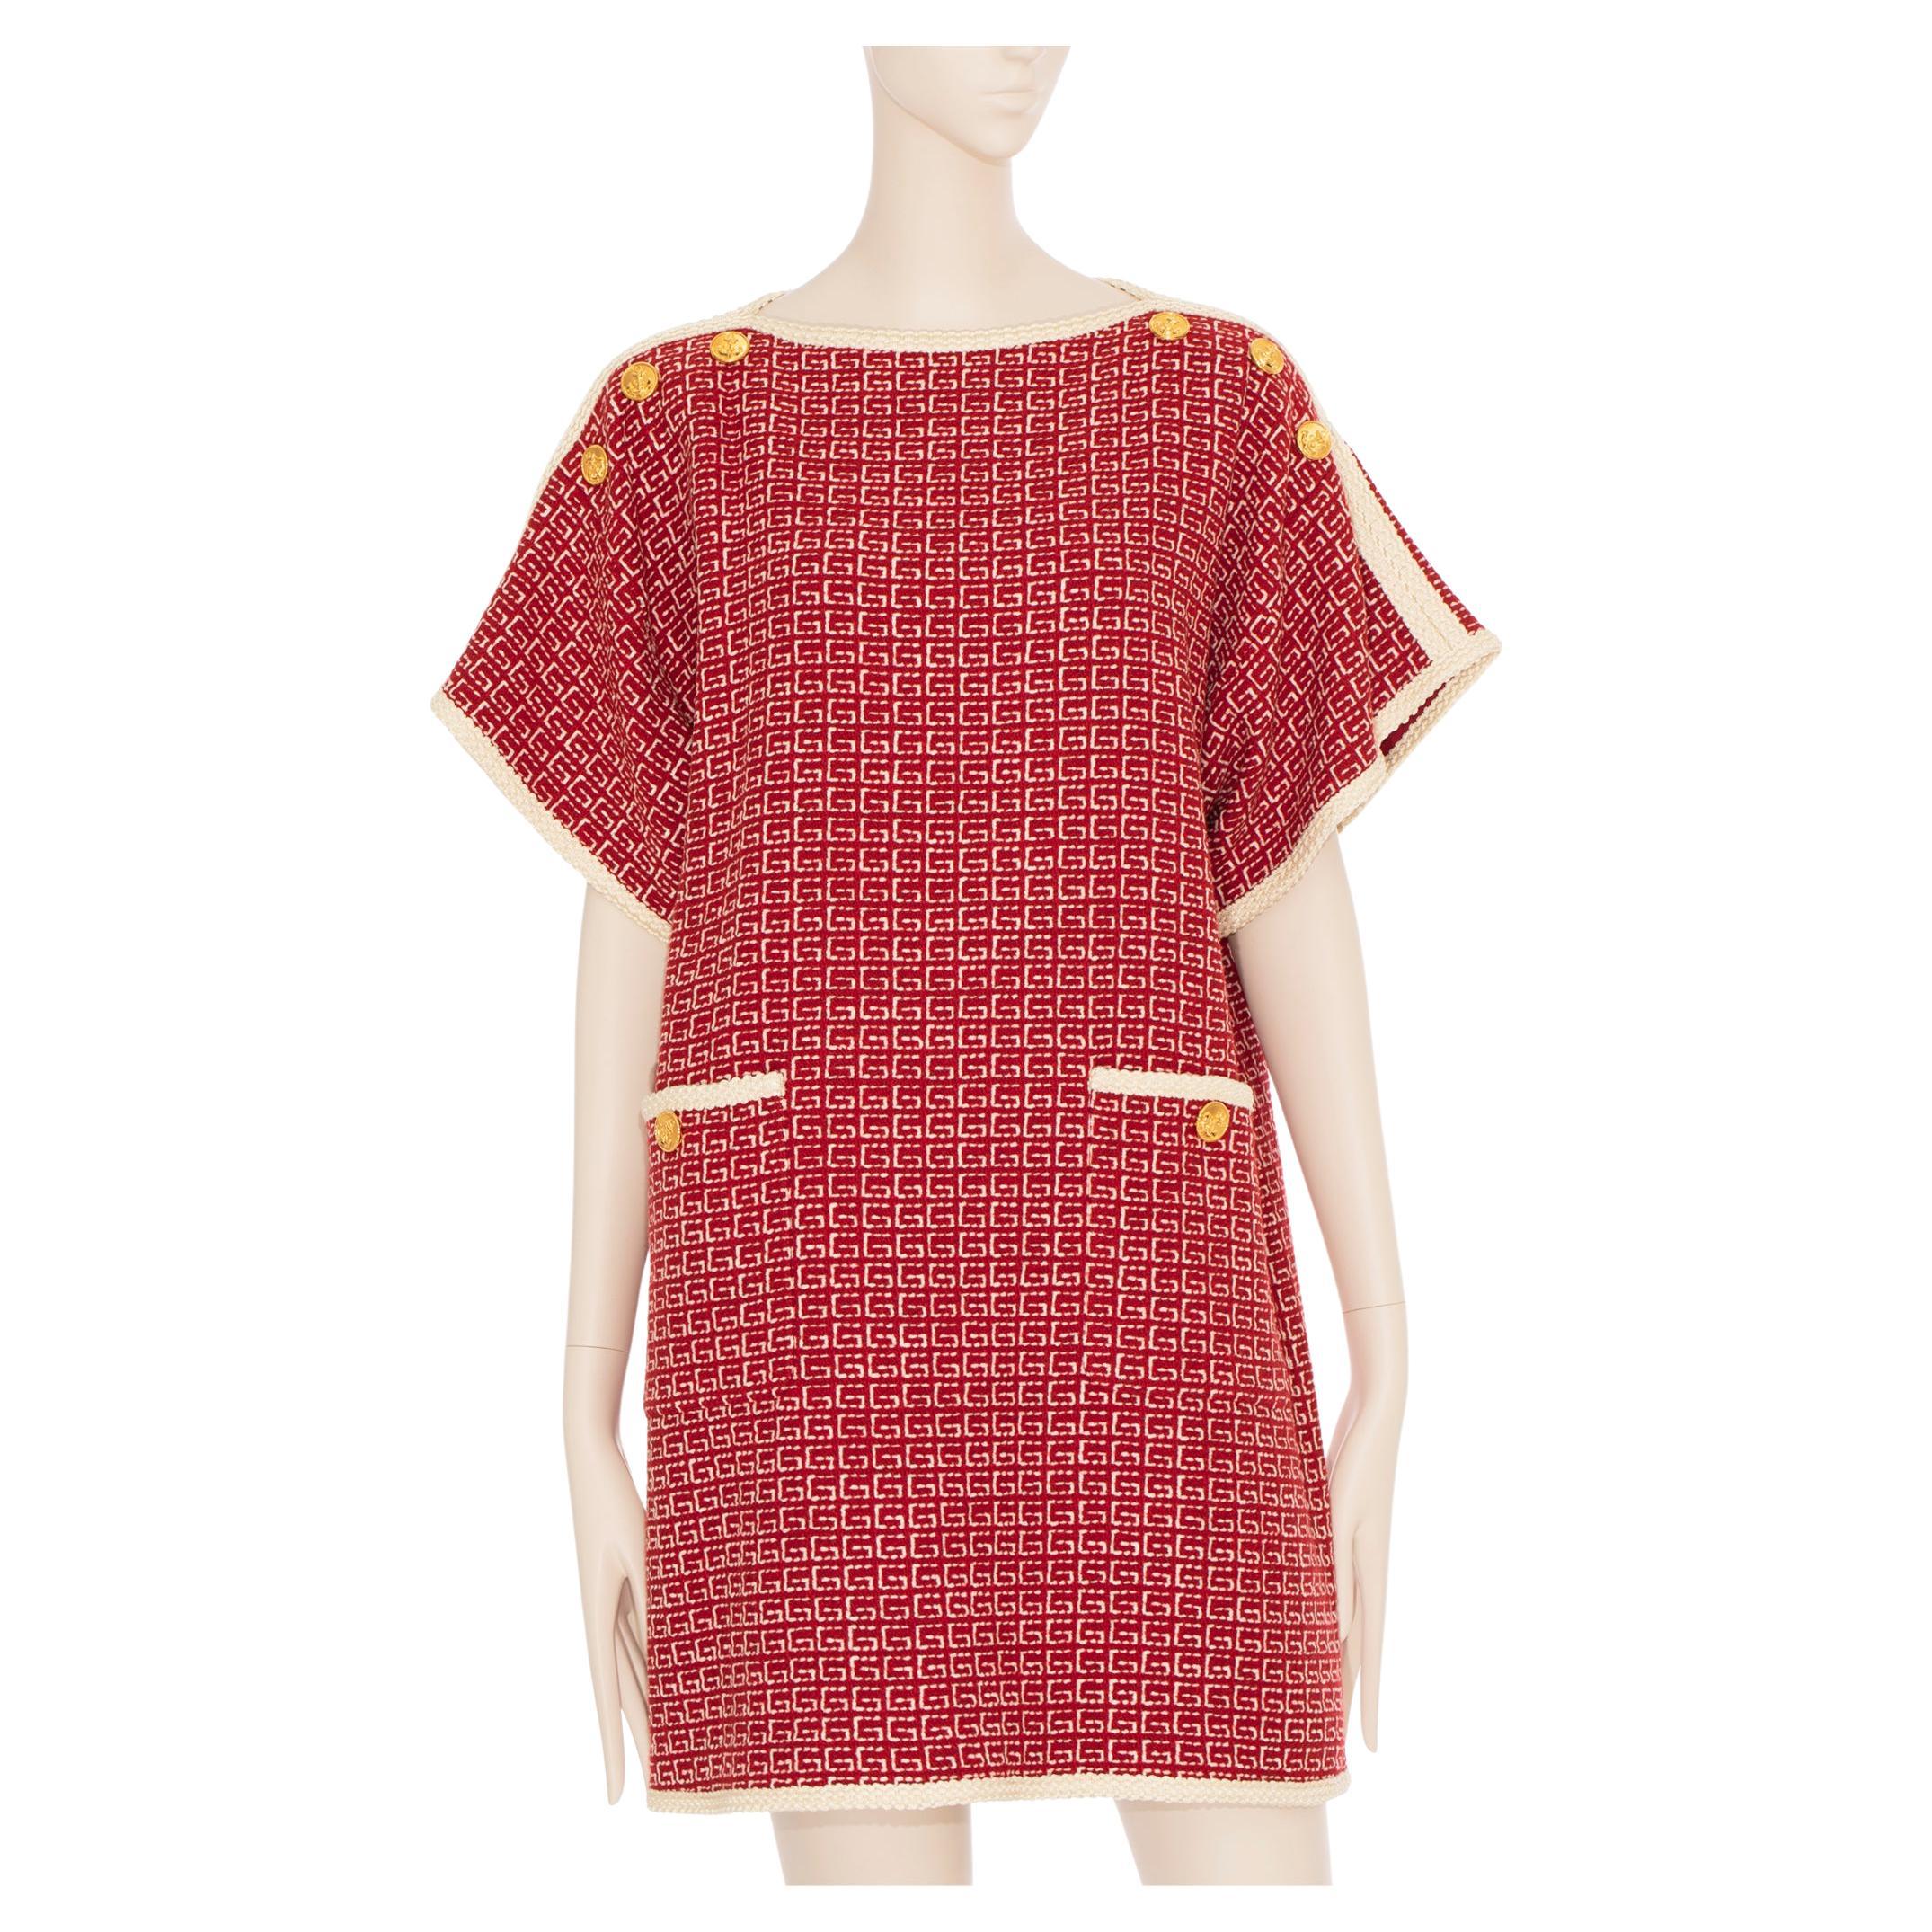 Gucci Tweed Red & Off-White Tunic Dress 38 IT For Sale